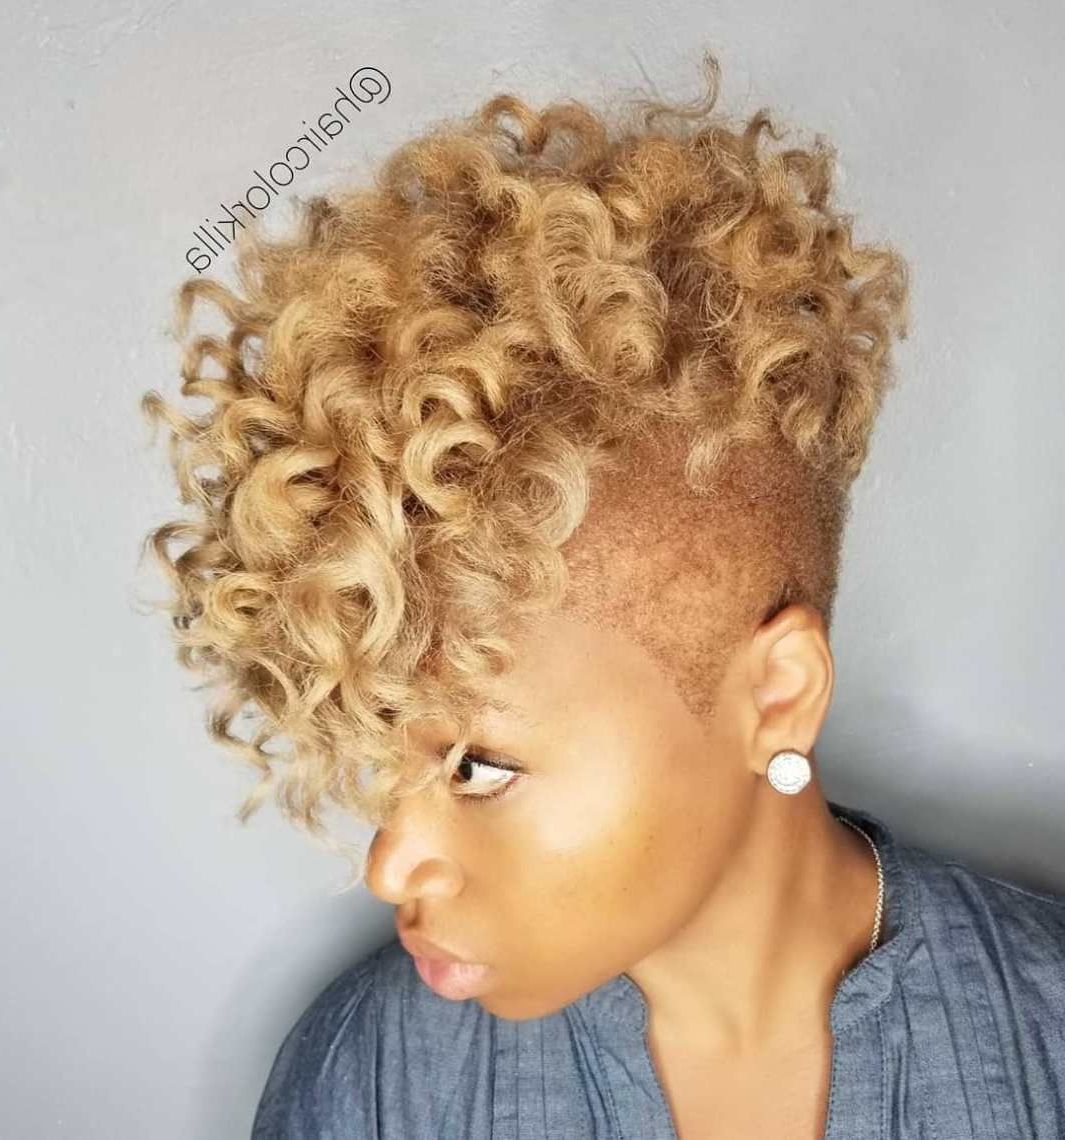 Pin On Sheikas Hair Within Trendy Short Blonde Braids Mohawk Hairstyles (View 9 of 20)